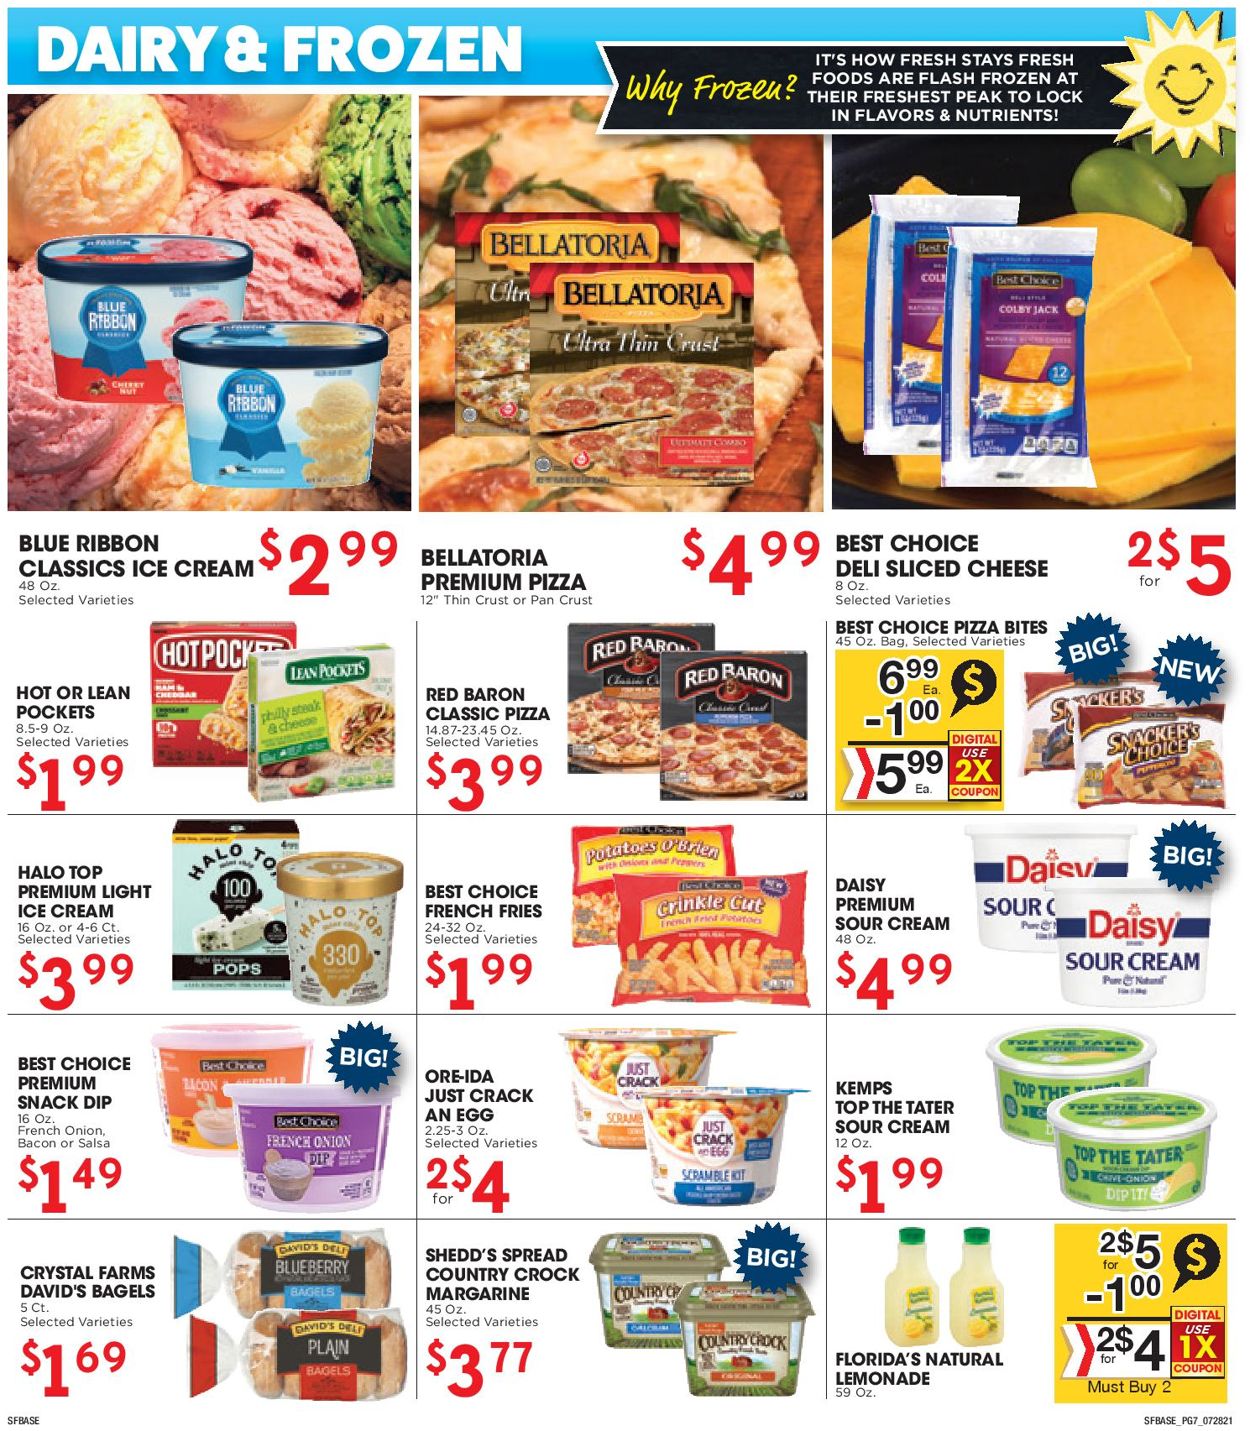 Sunshine Foods Ad from 07/28/2021